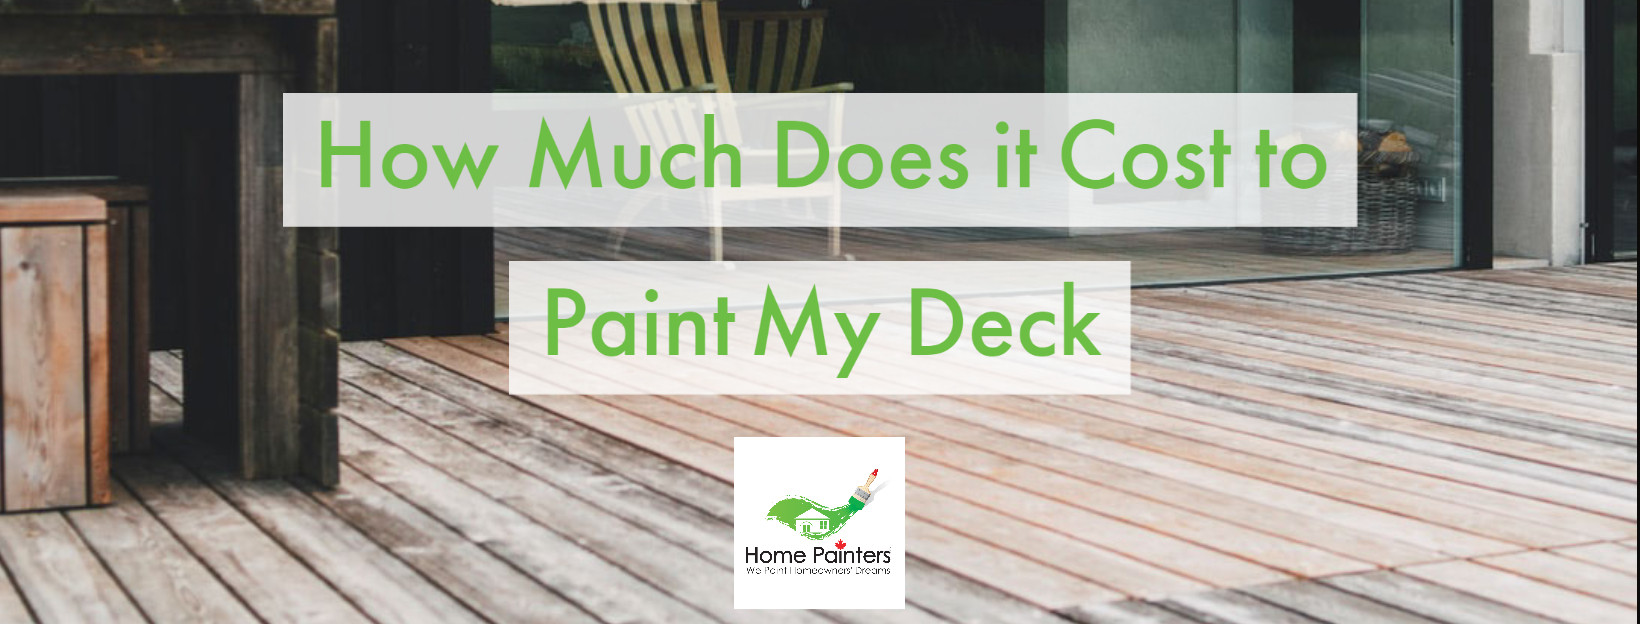 Cost To Paint A Deck
 How Much Does it Cost to Paint My Deck